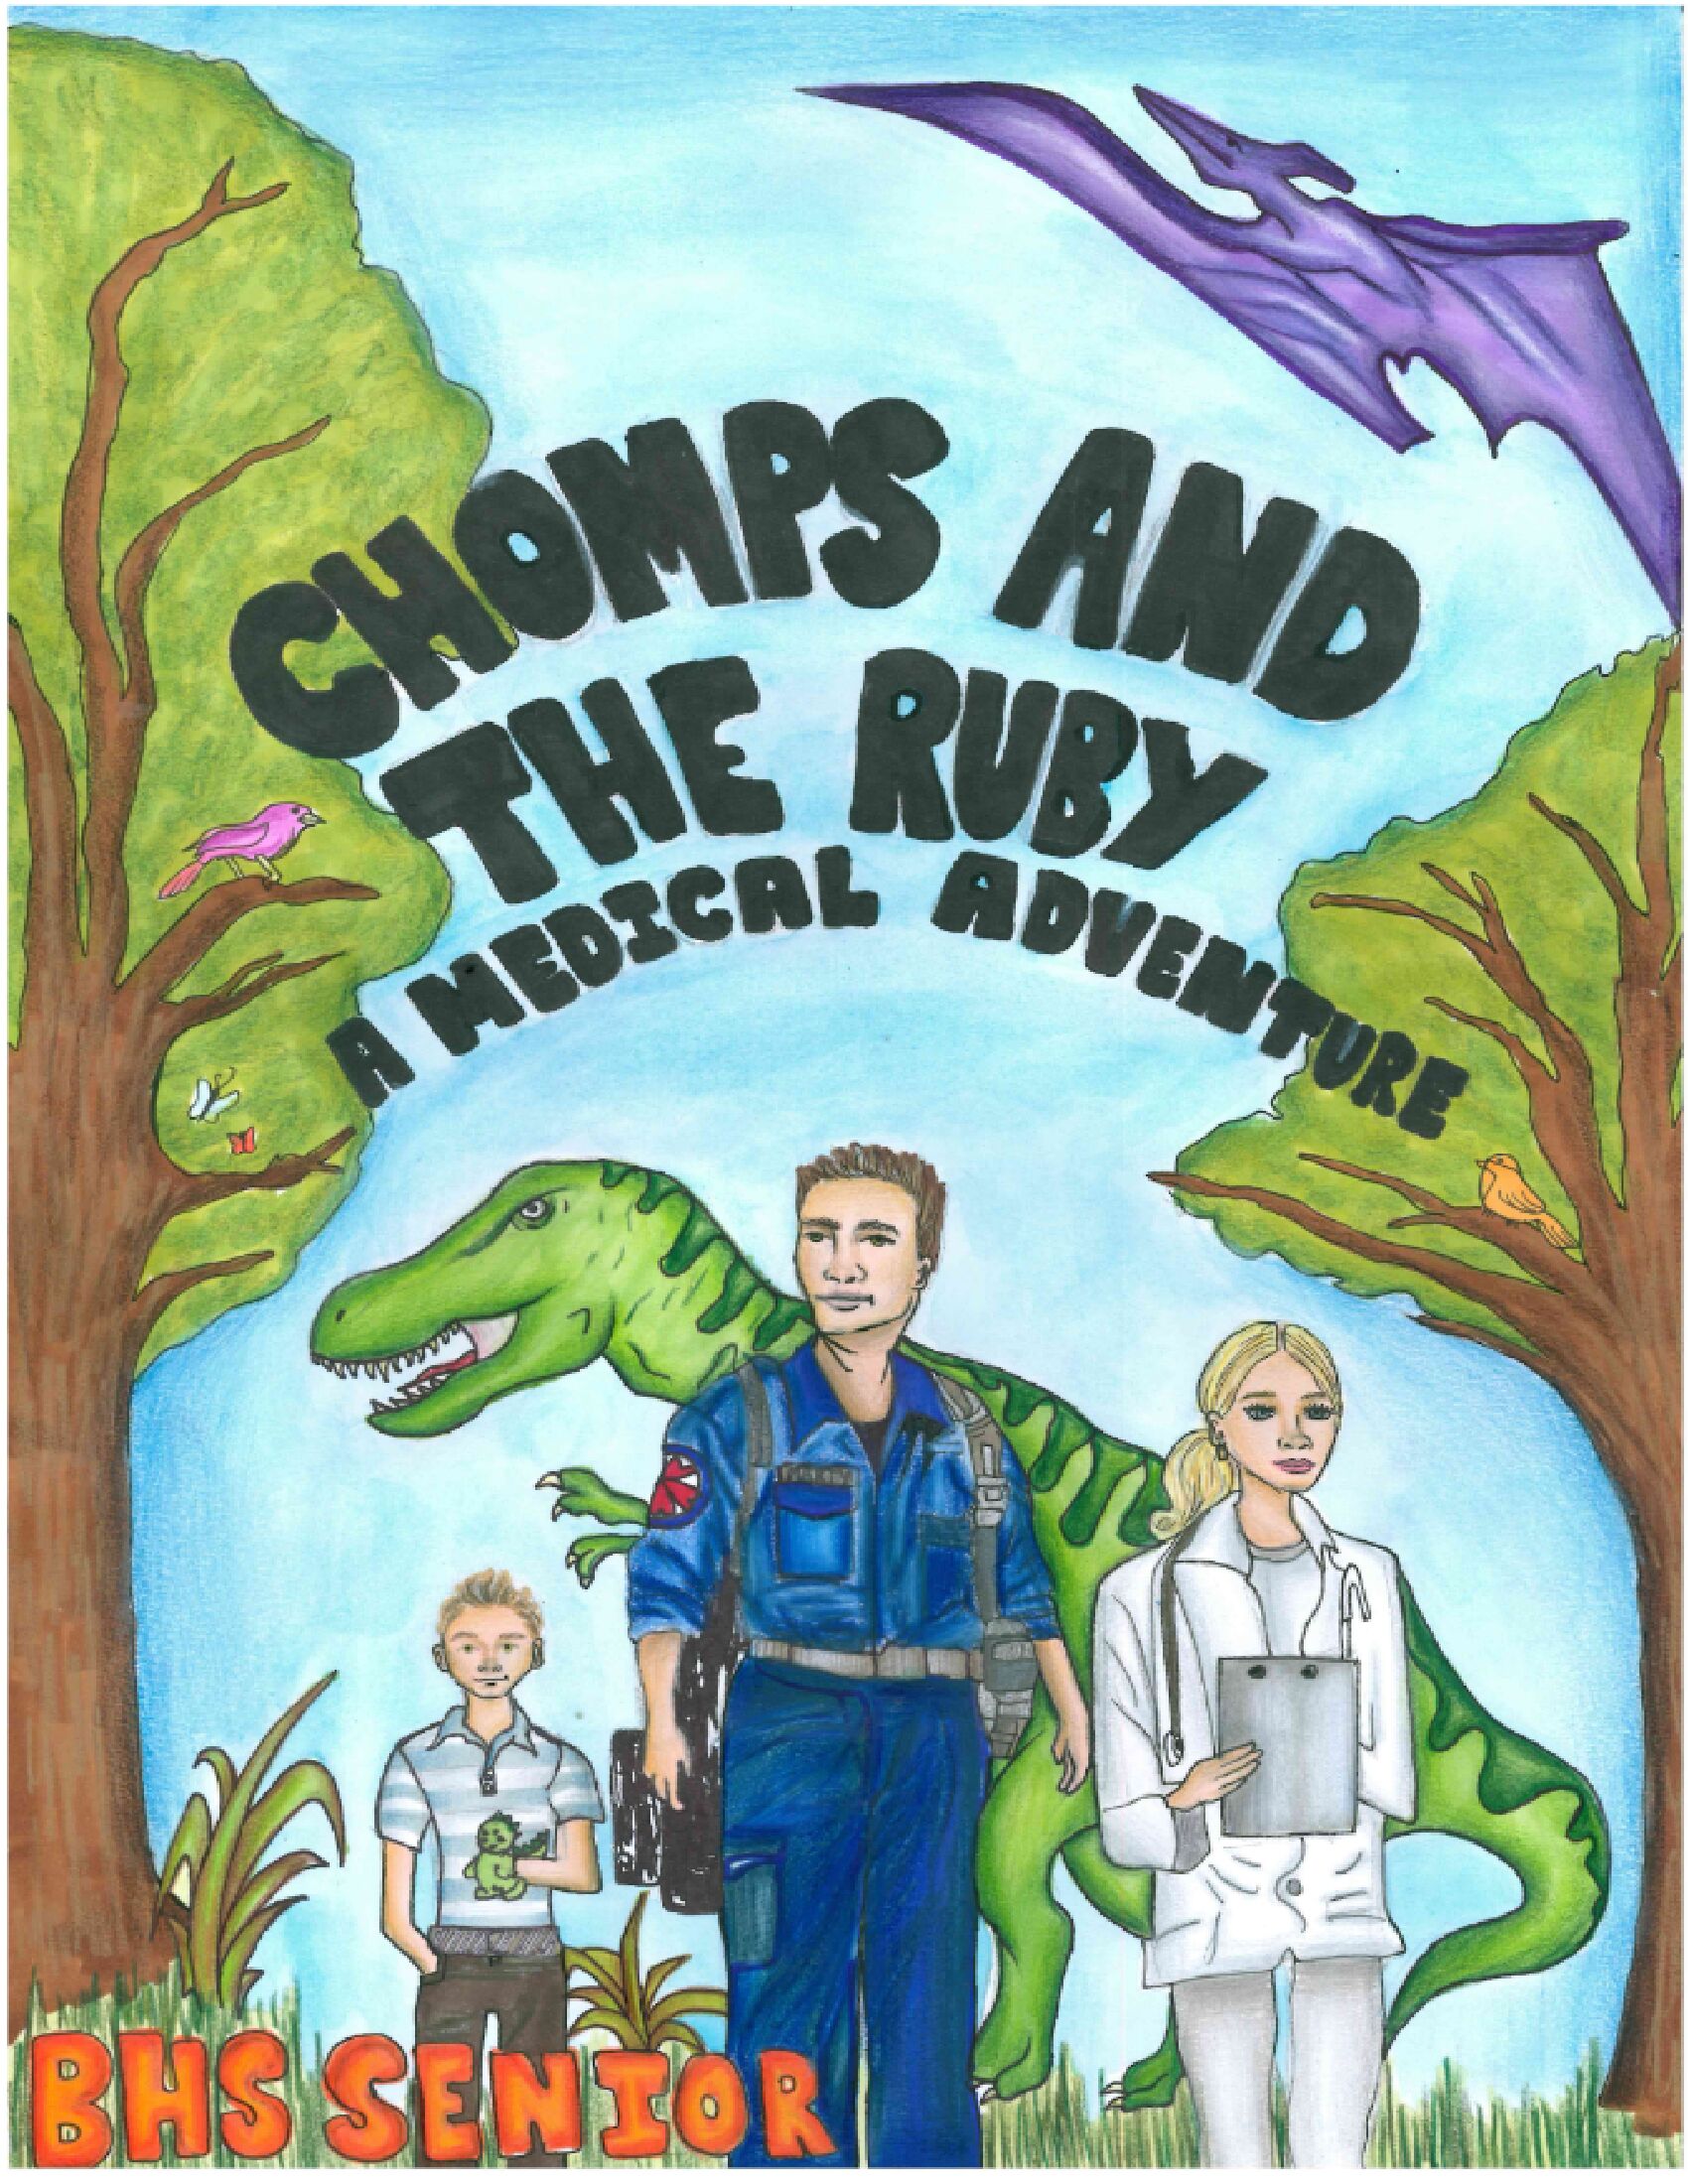 Chomps and The Ruby: A Medical Adventure